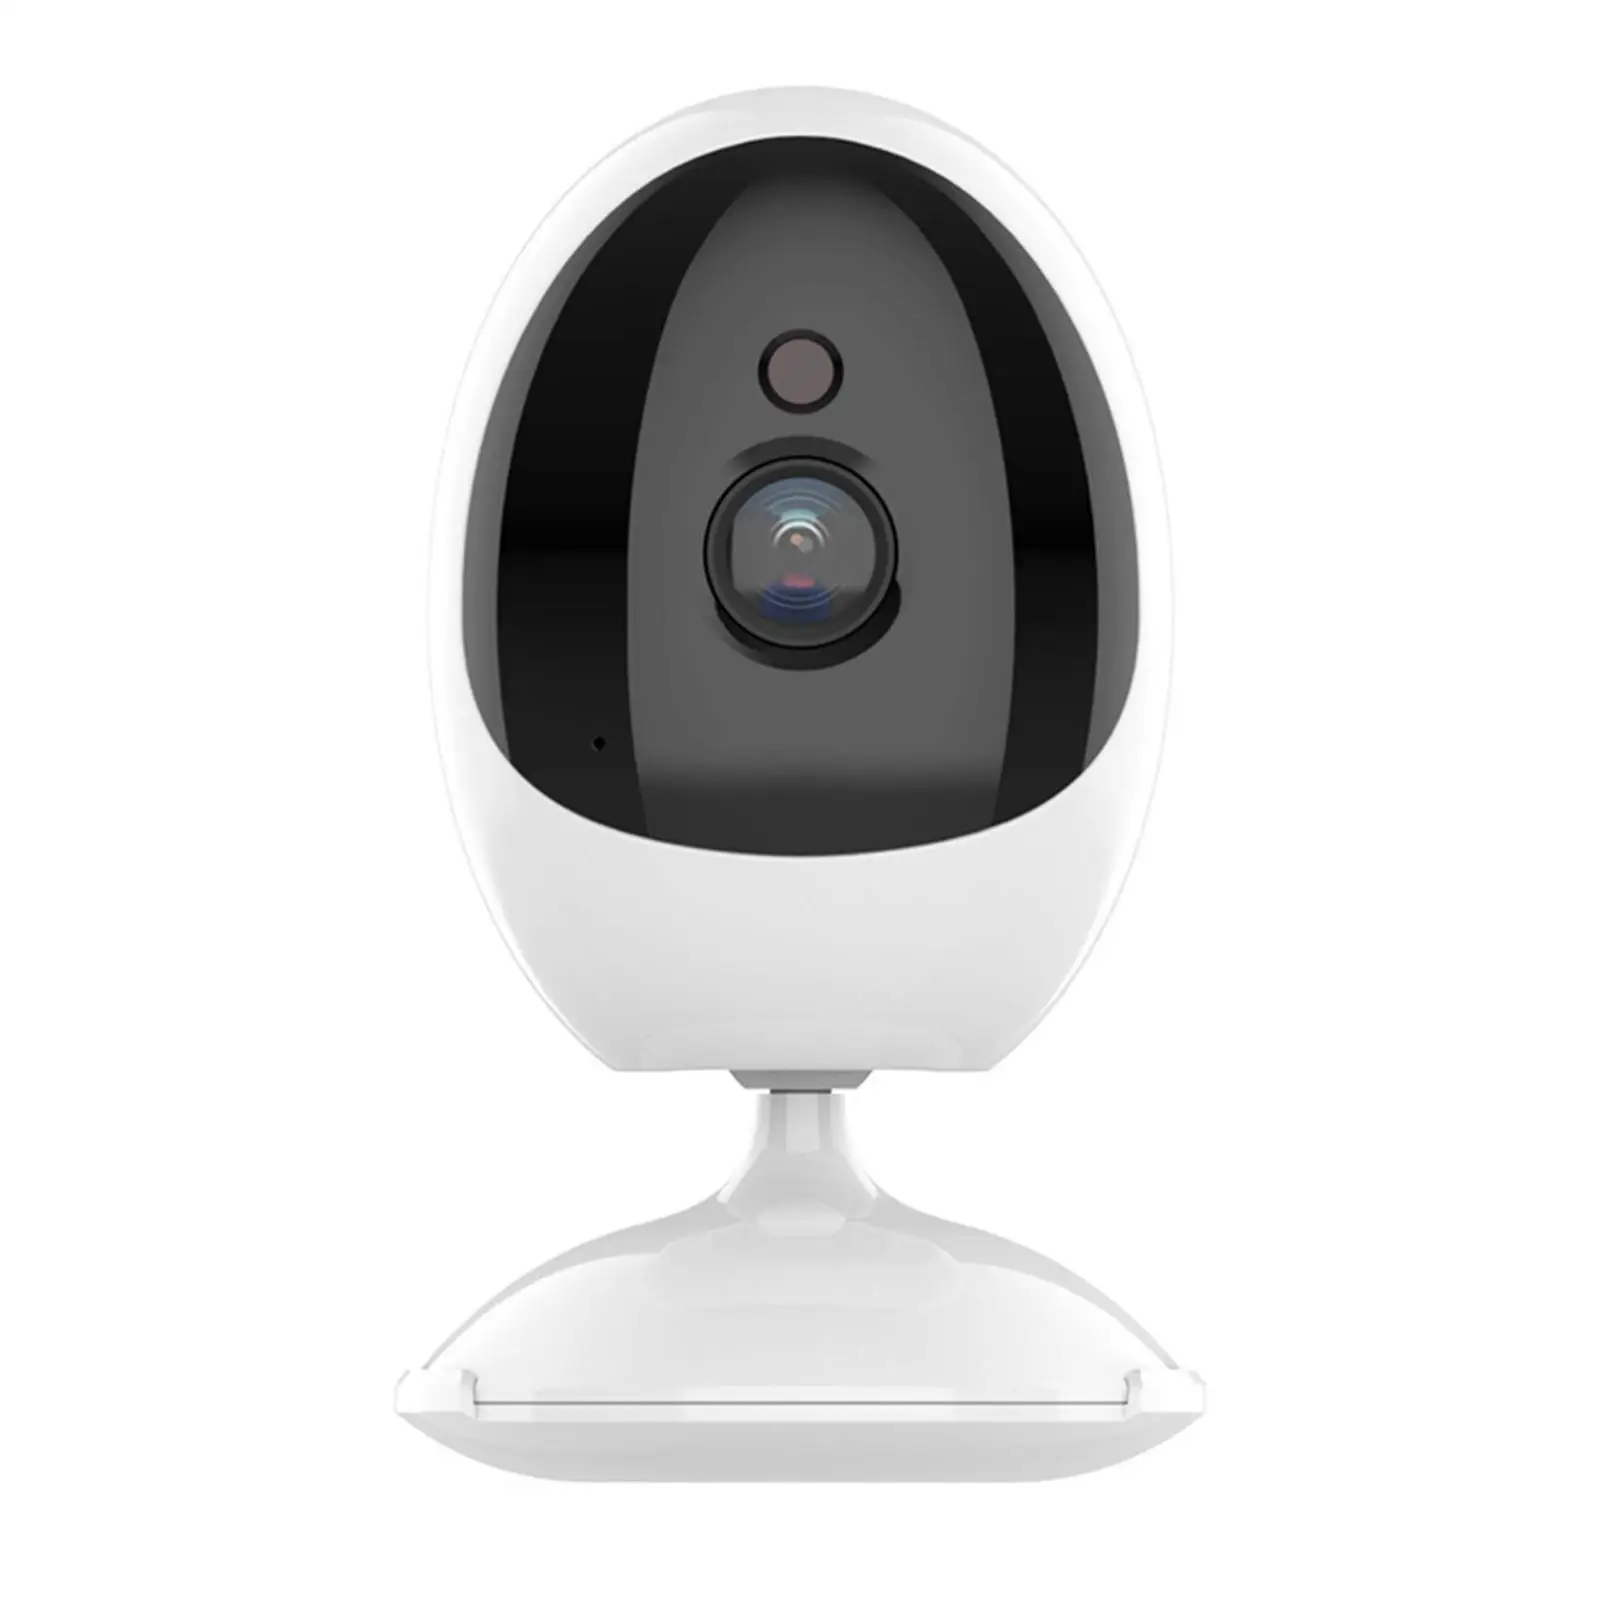 1080P WiFi Security Camera Indoor Plug-Uk with Phone App Night View Cloud Storage Remote Control Easy to Set up for Bedroom